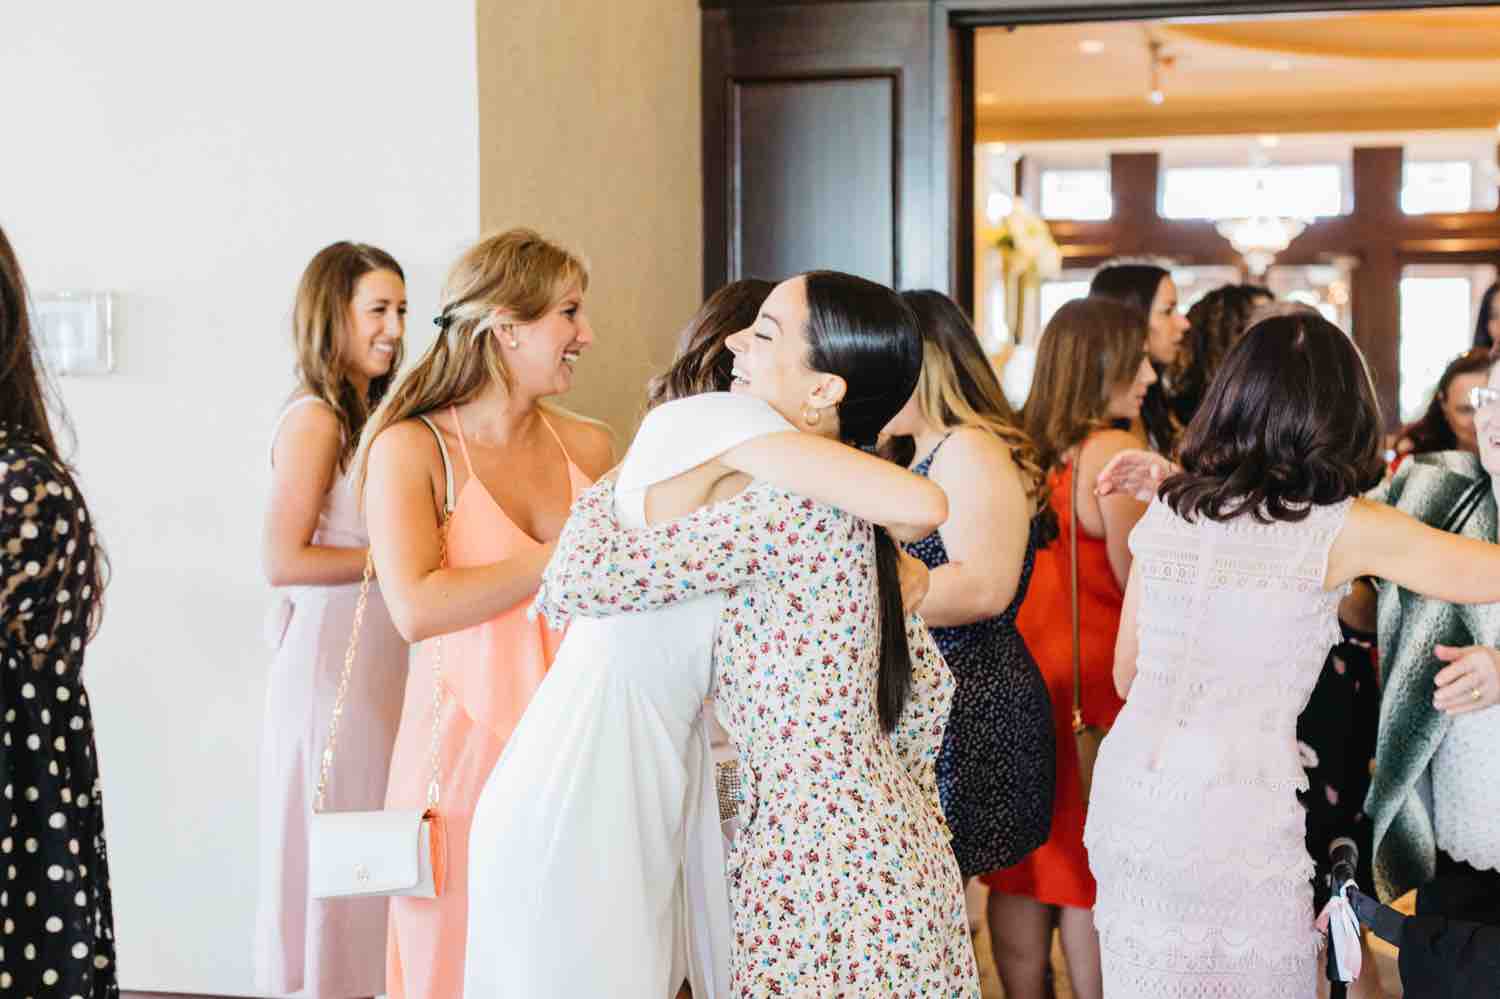 Guests mingling during Bridal shower at Eagles Nest Golf Club in Vaughan